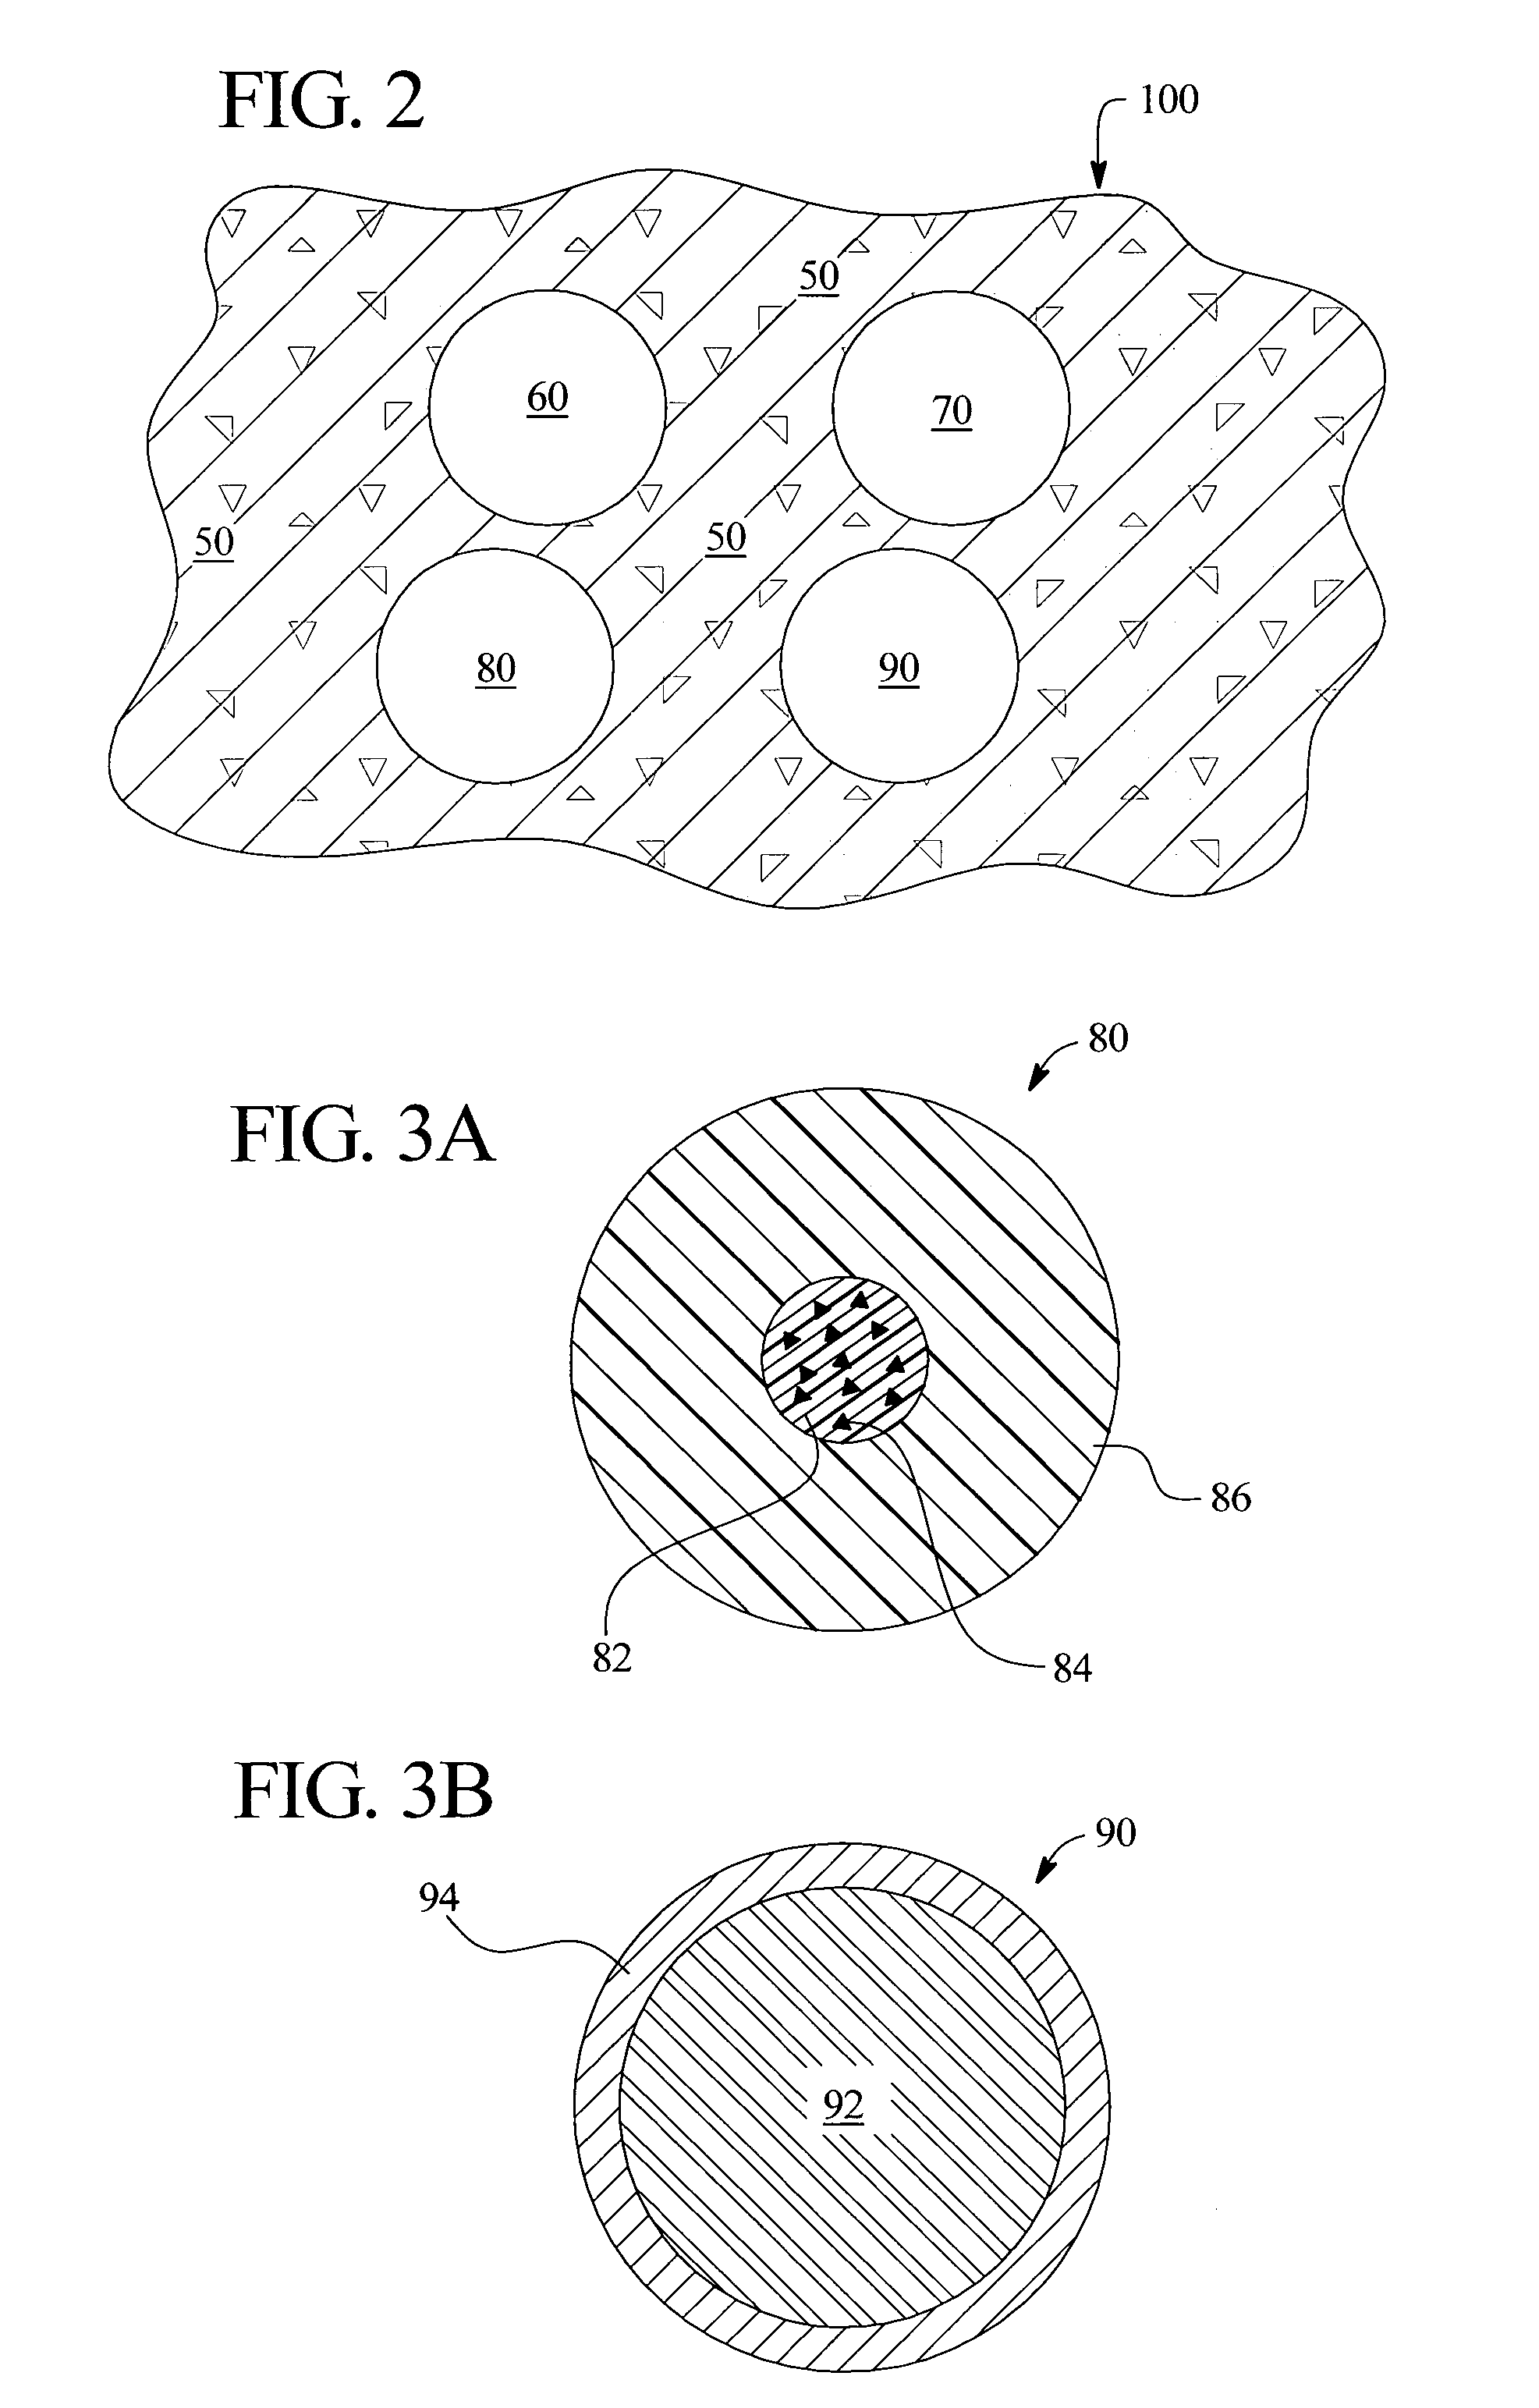 Direct application voltage variable material, components thereof and devices employing same